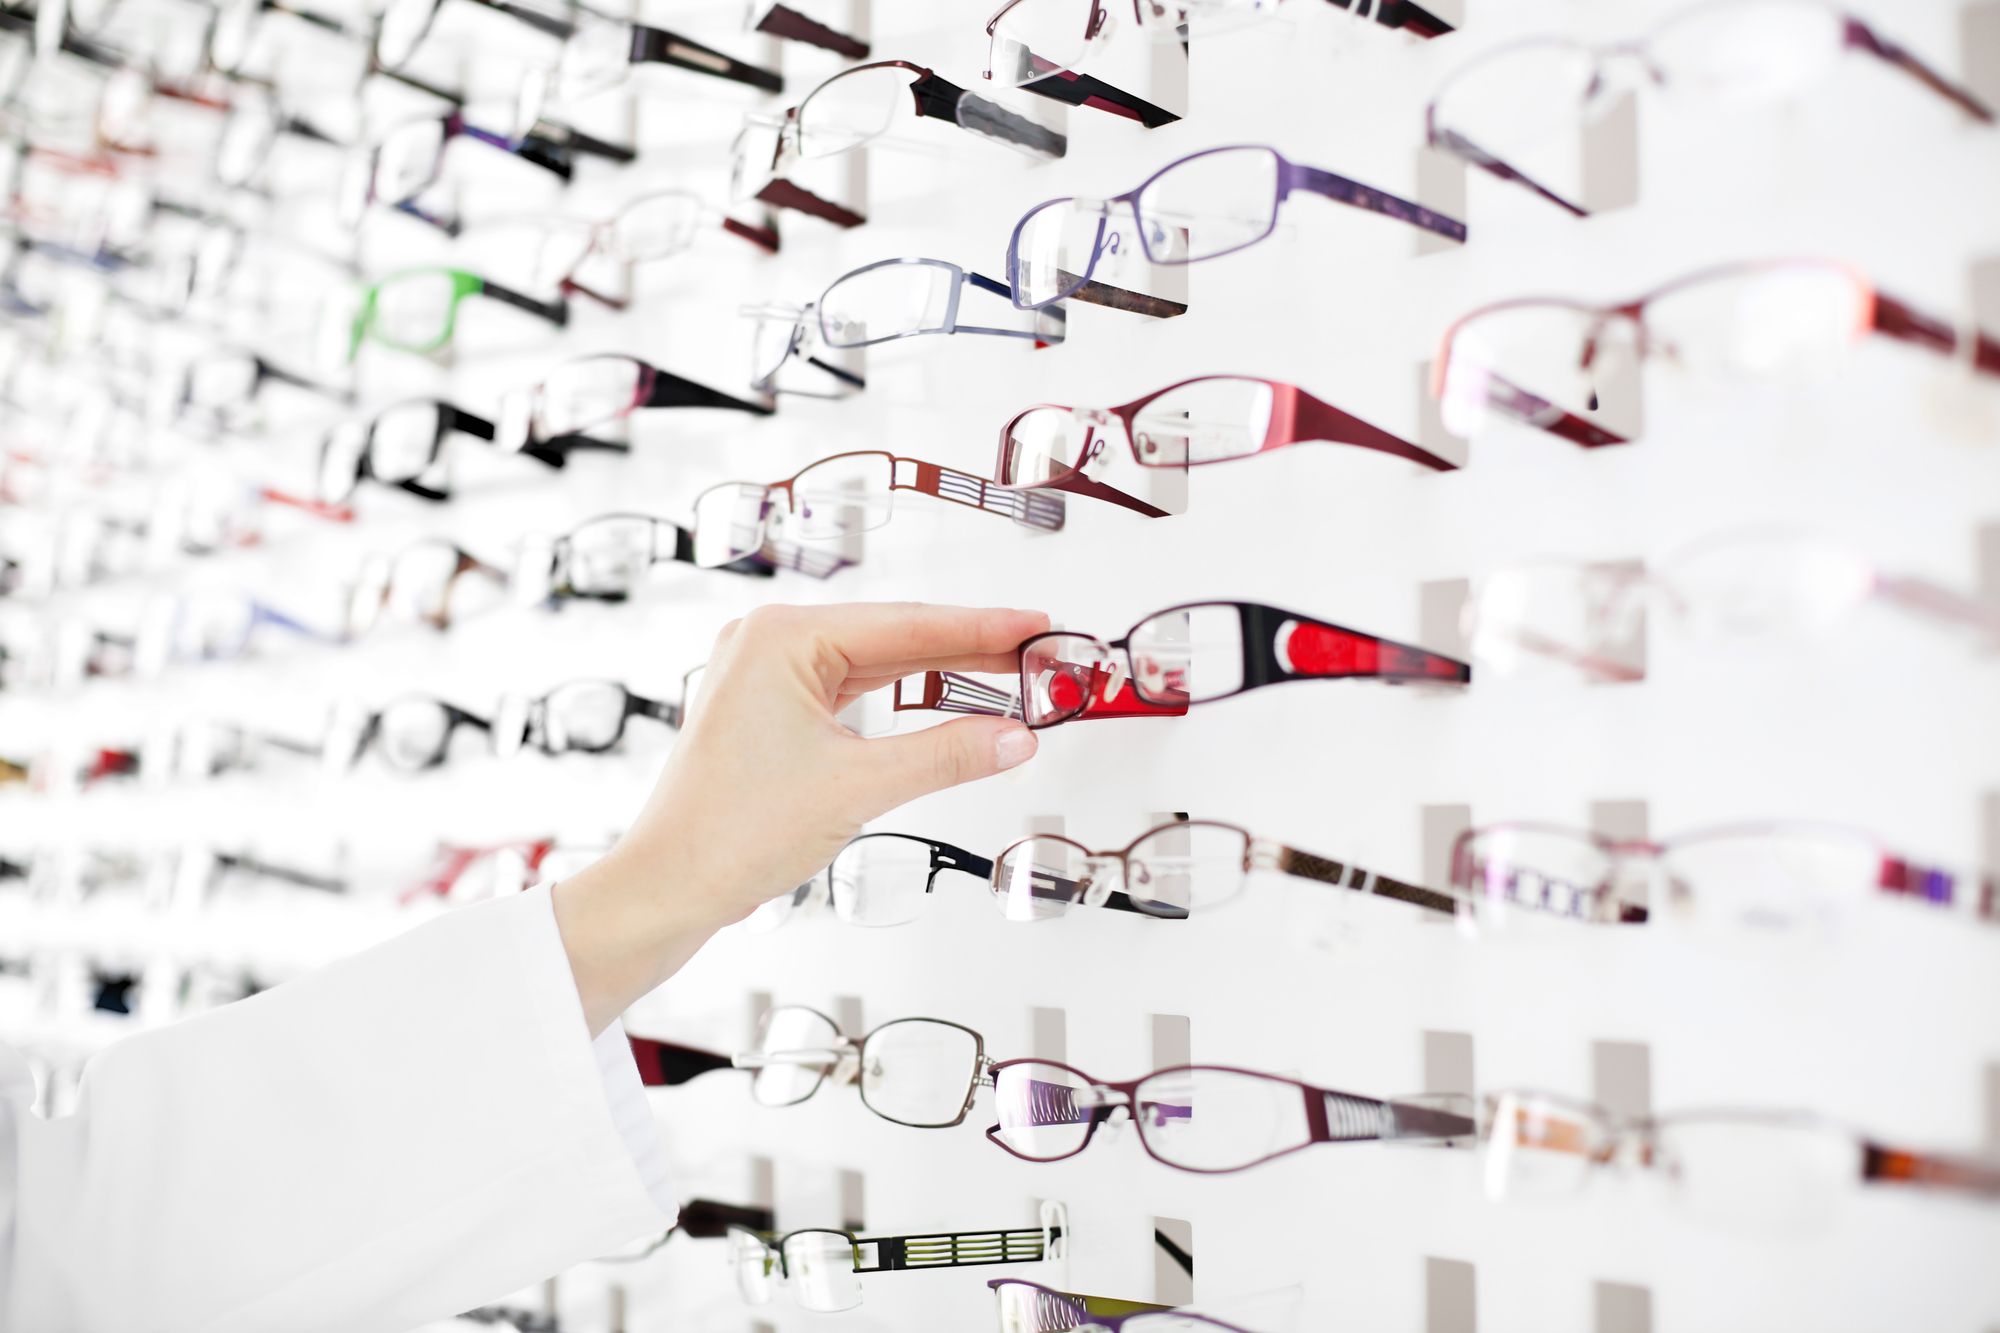 Optician suggest glasses. Closeup showing many eyeglasses in background.